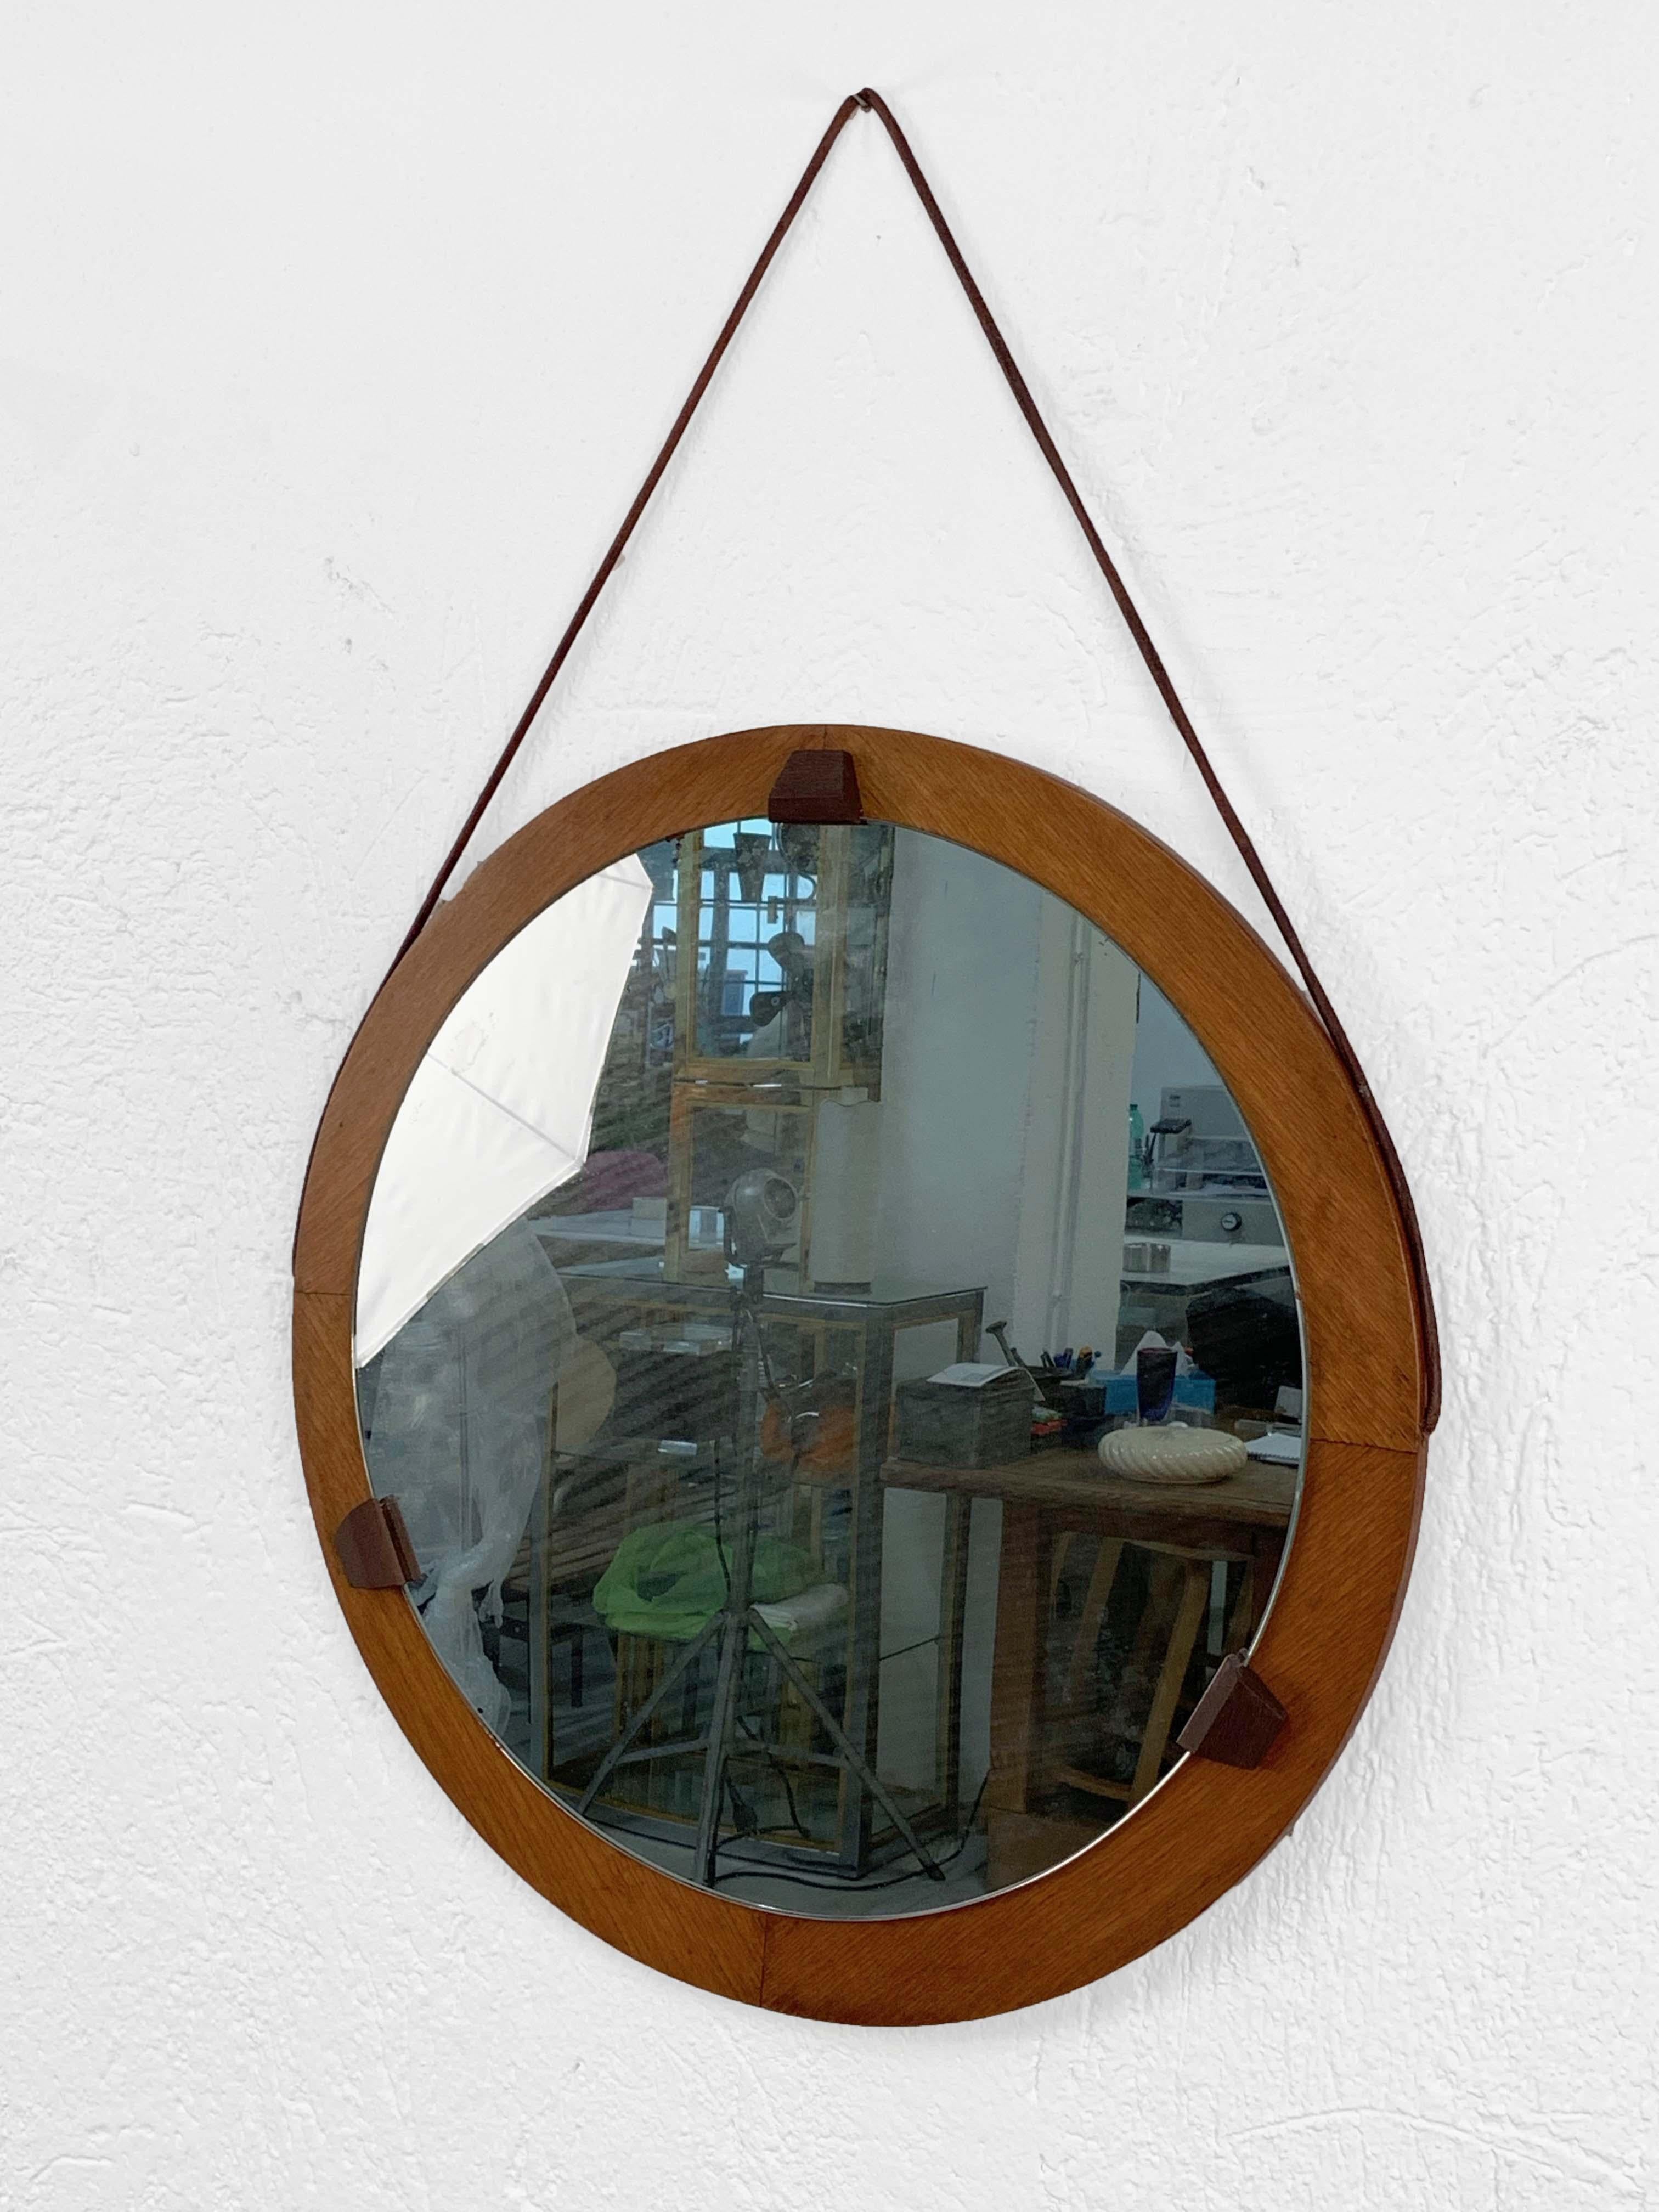 1960s round mirror, teak structure.
Leather details.
Vintage, signs of use of time.